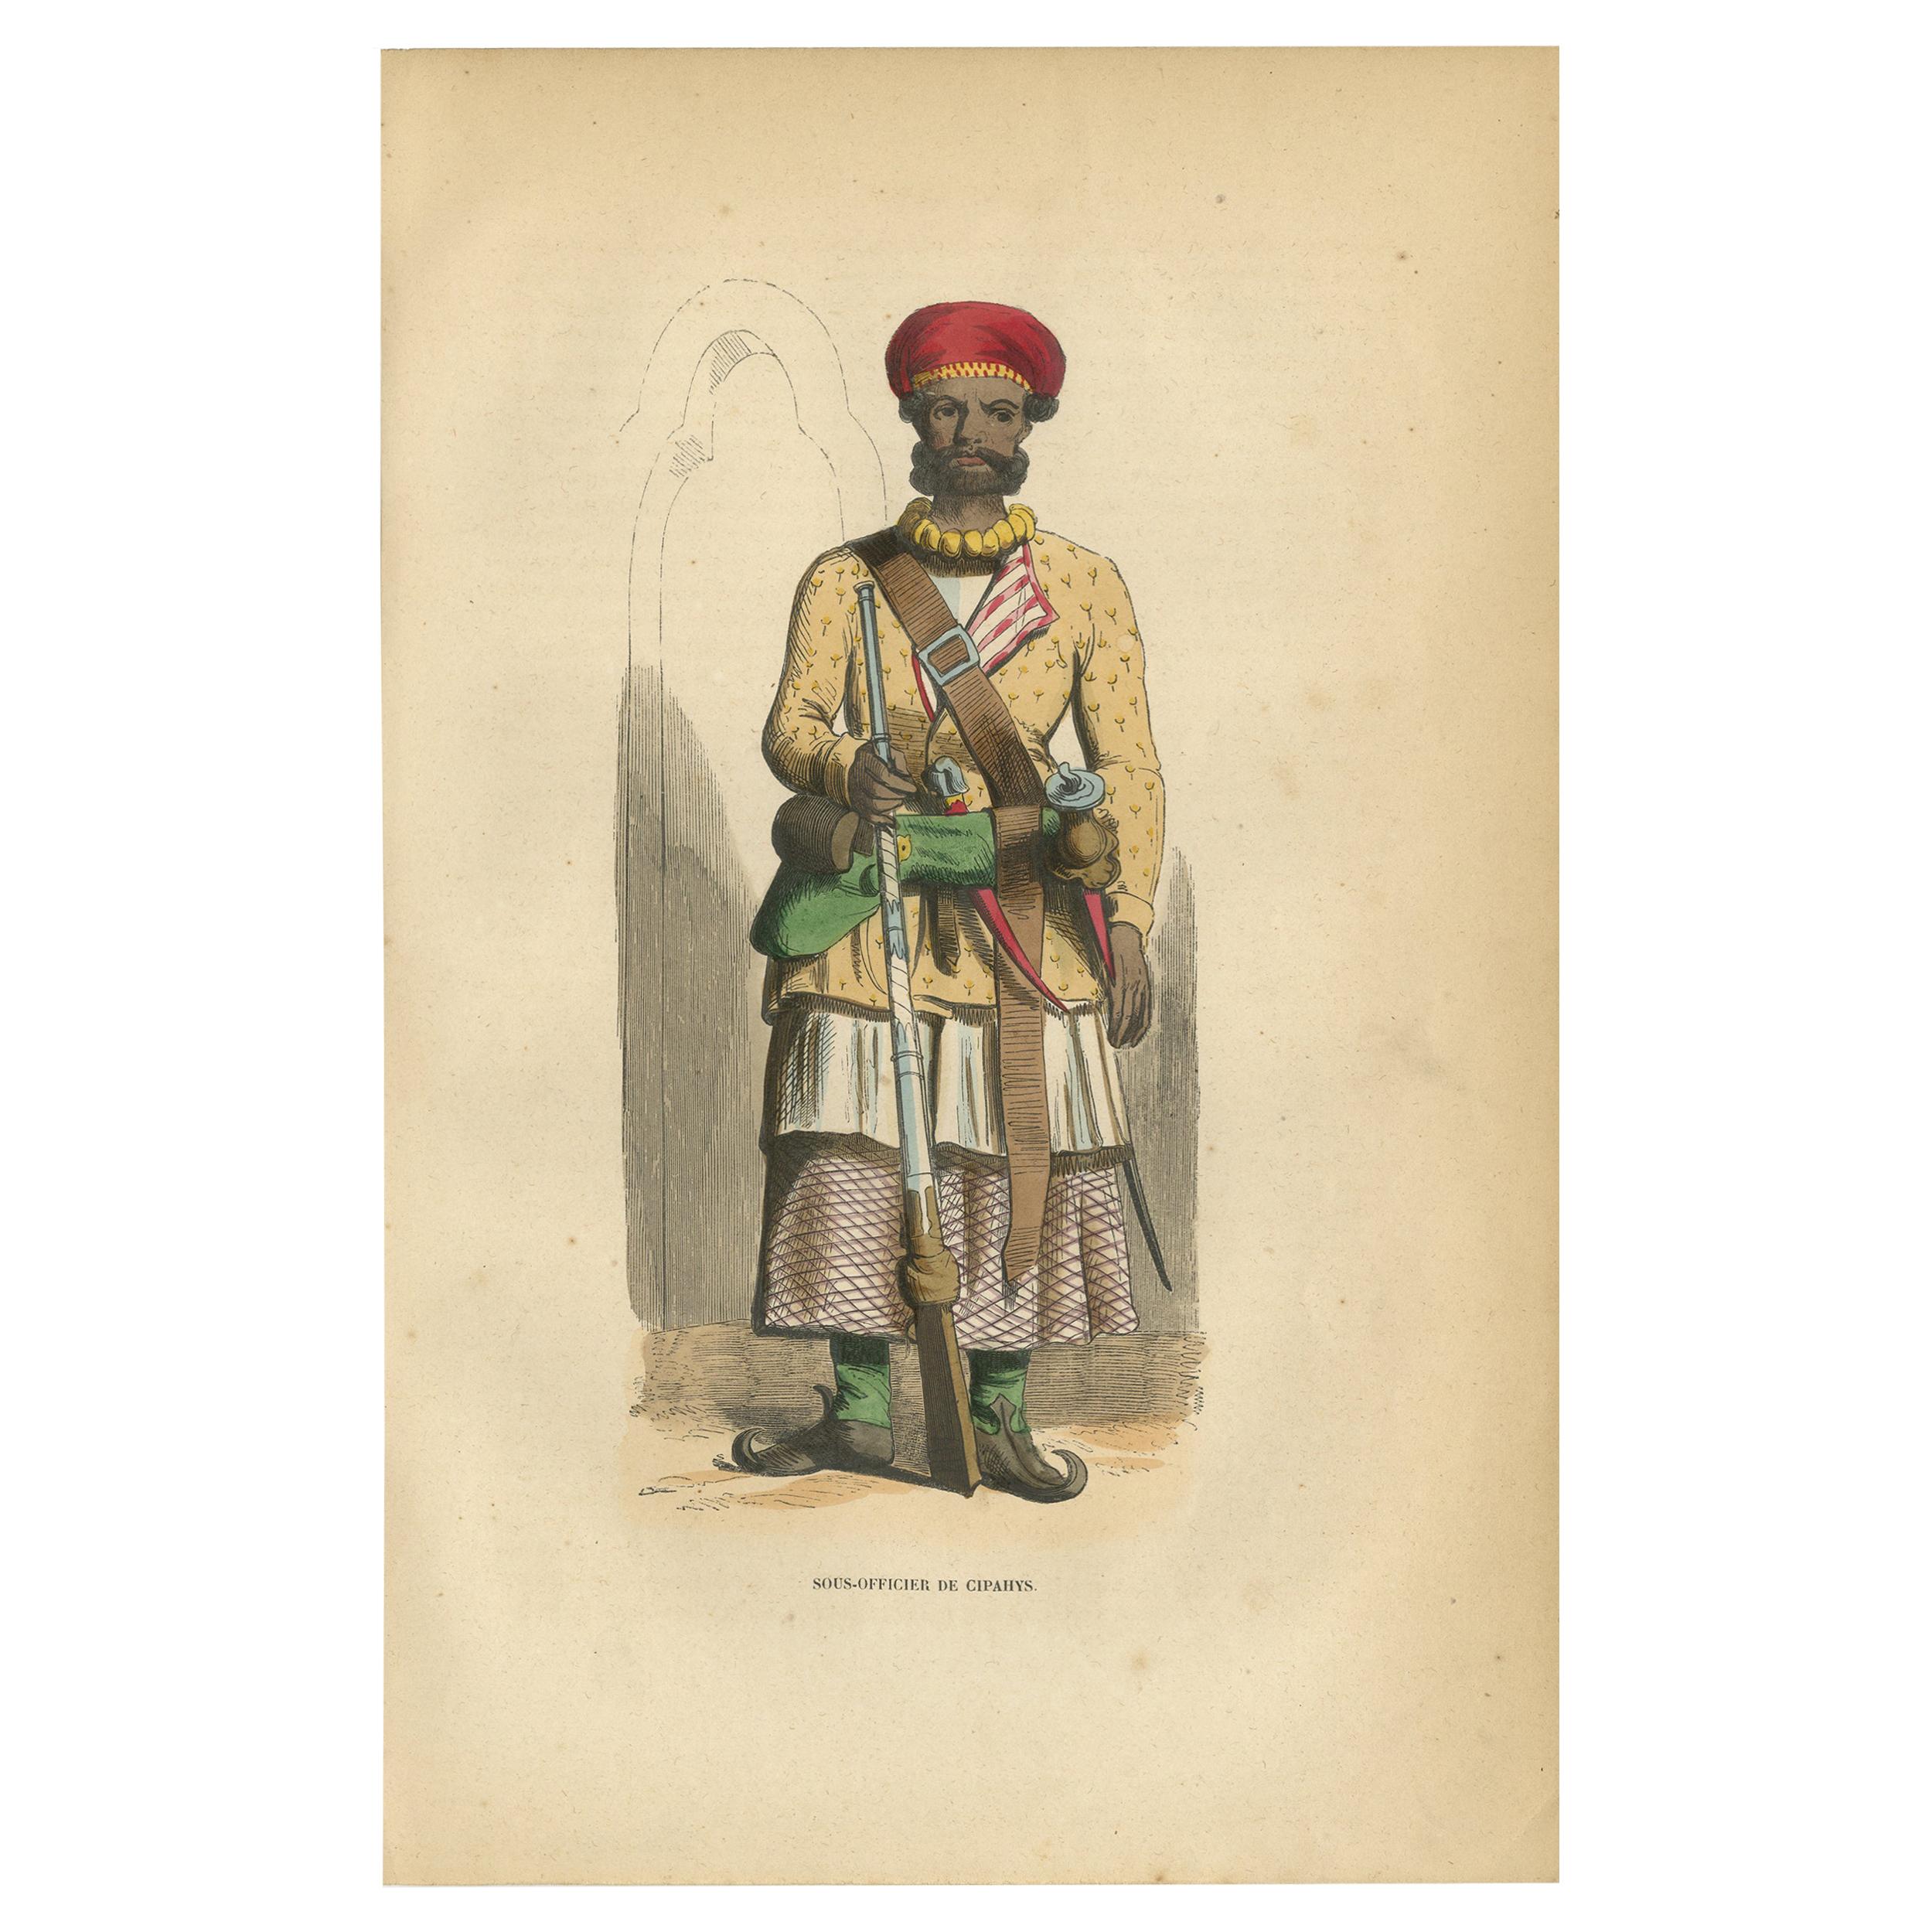 Antique Print of an Indian Sepoy Officer by Wahlen, '1843'